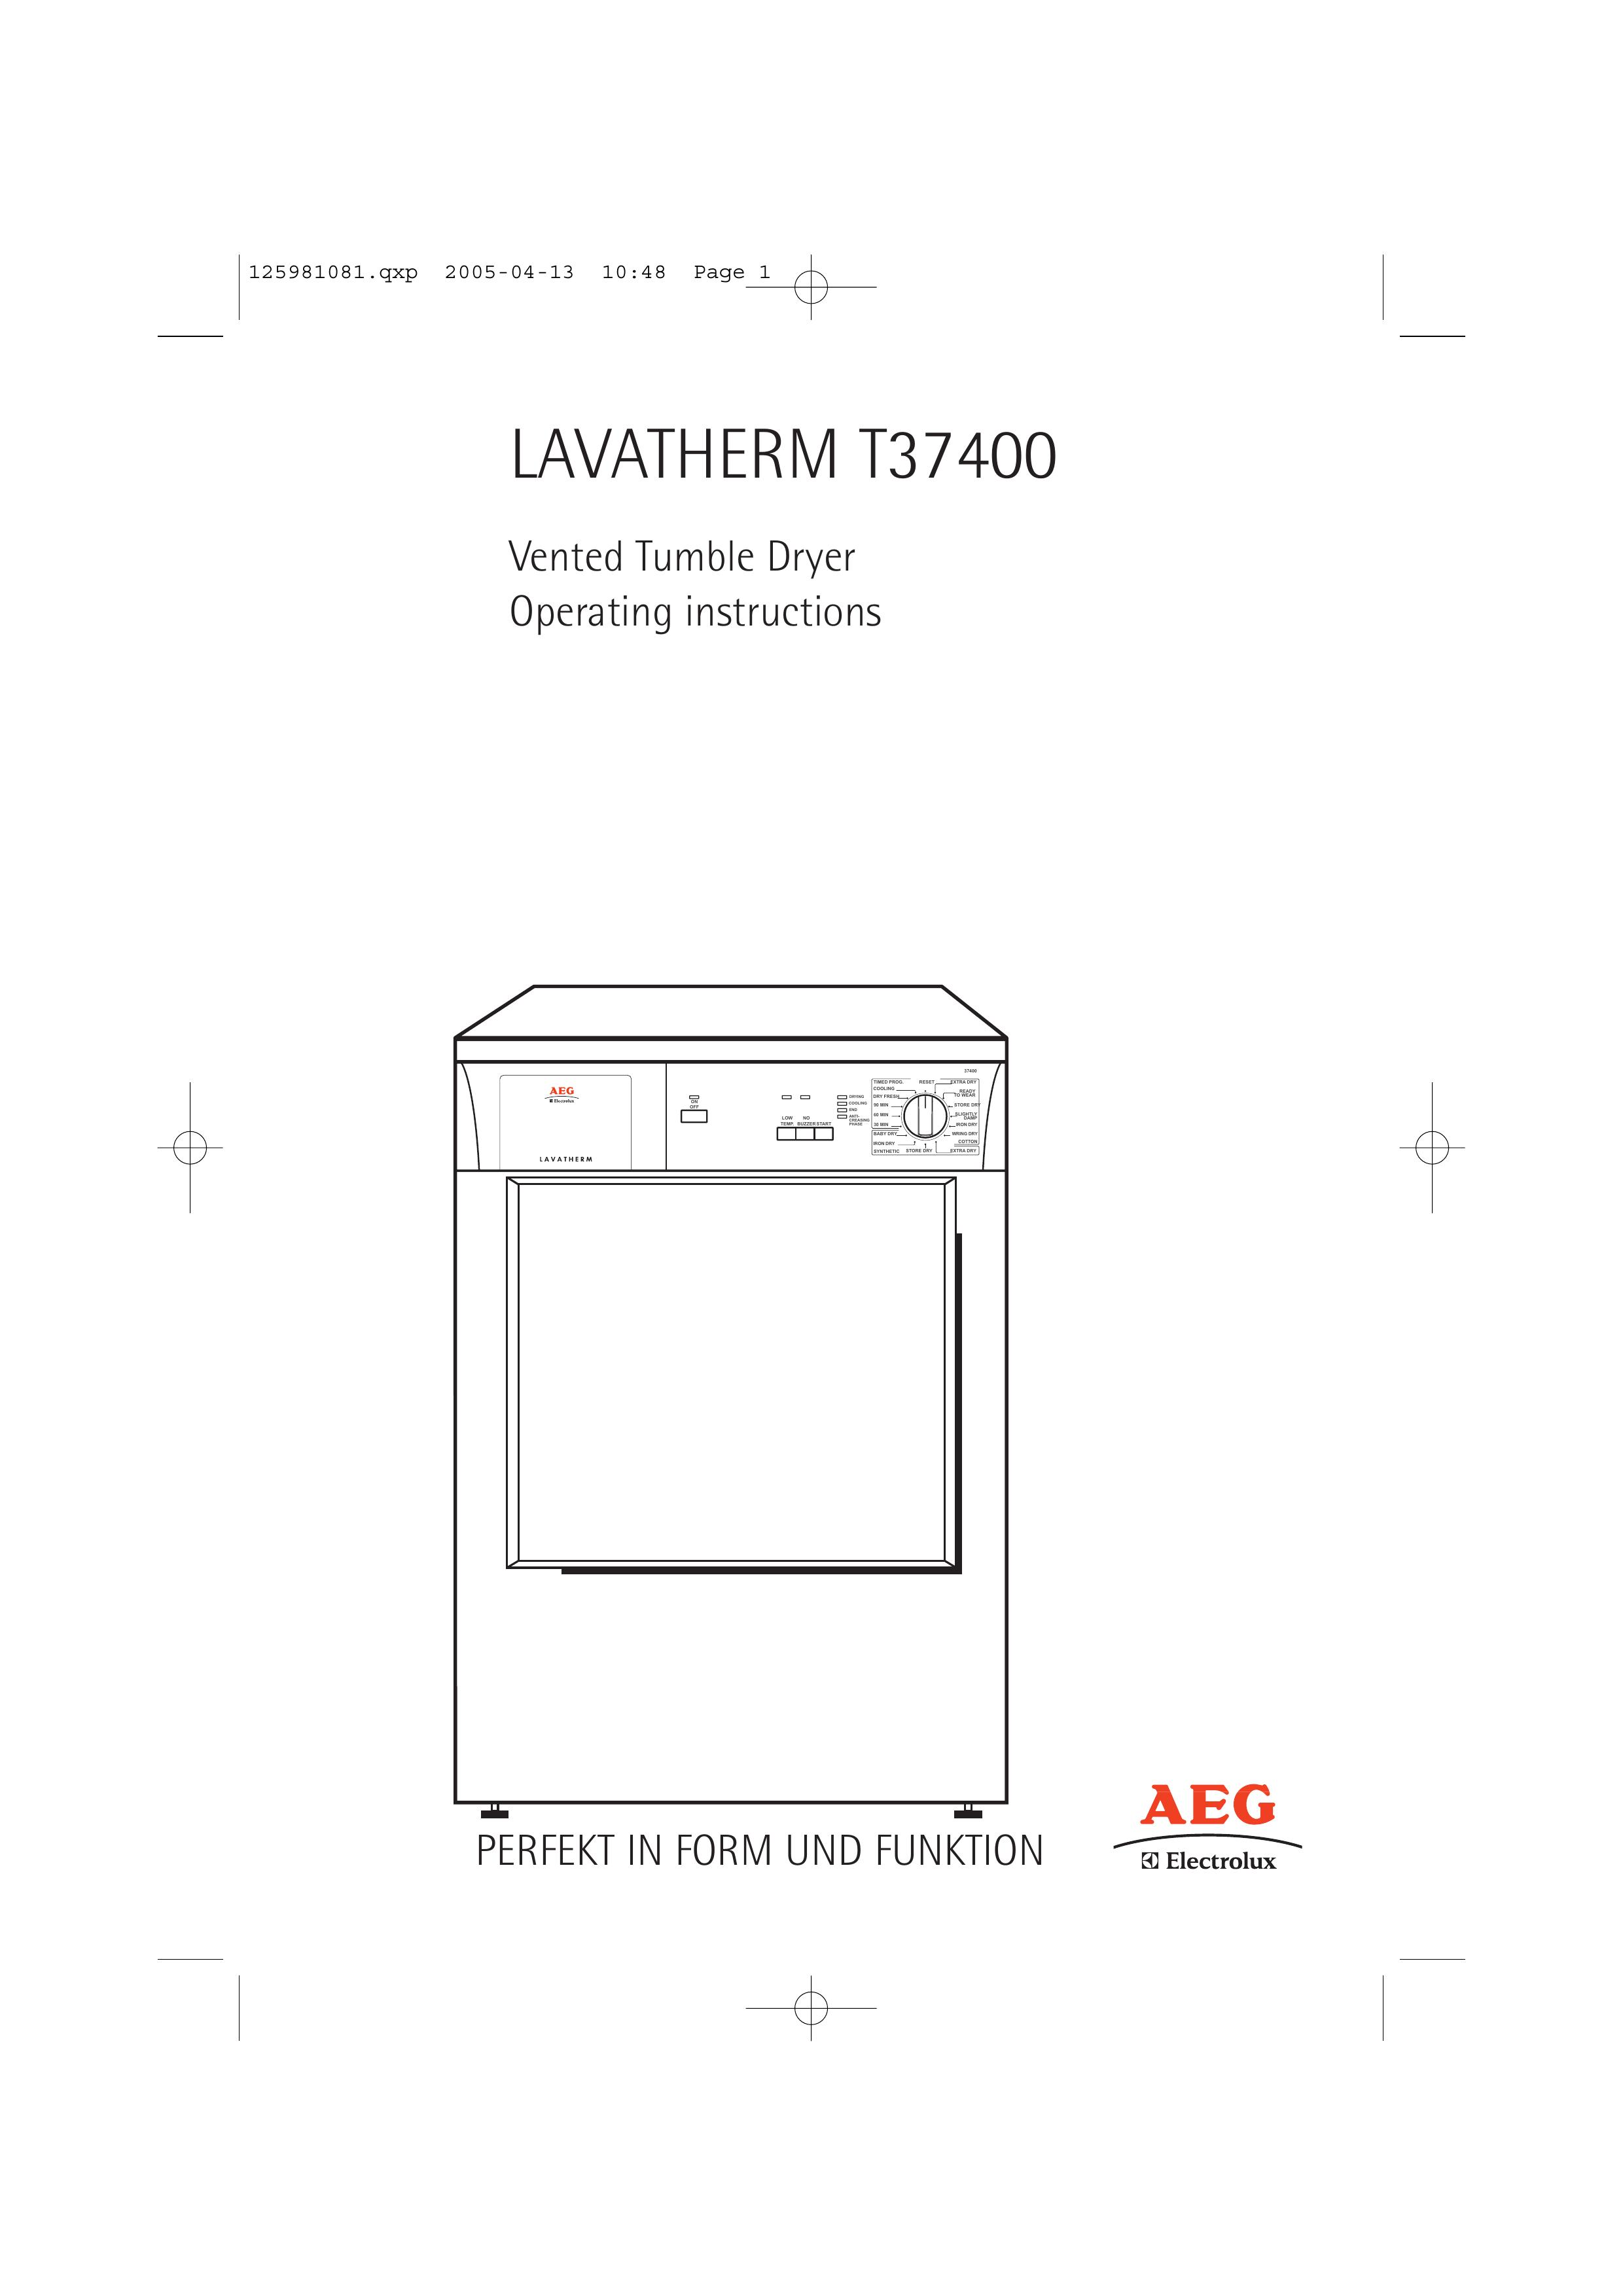 AEG T37400 Clothes Dryer User Manual (Page 1)